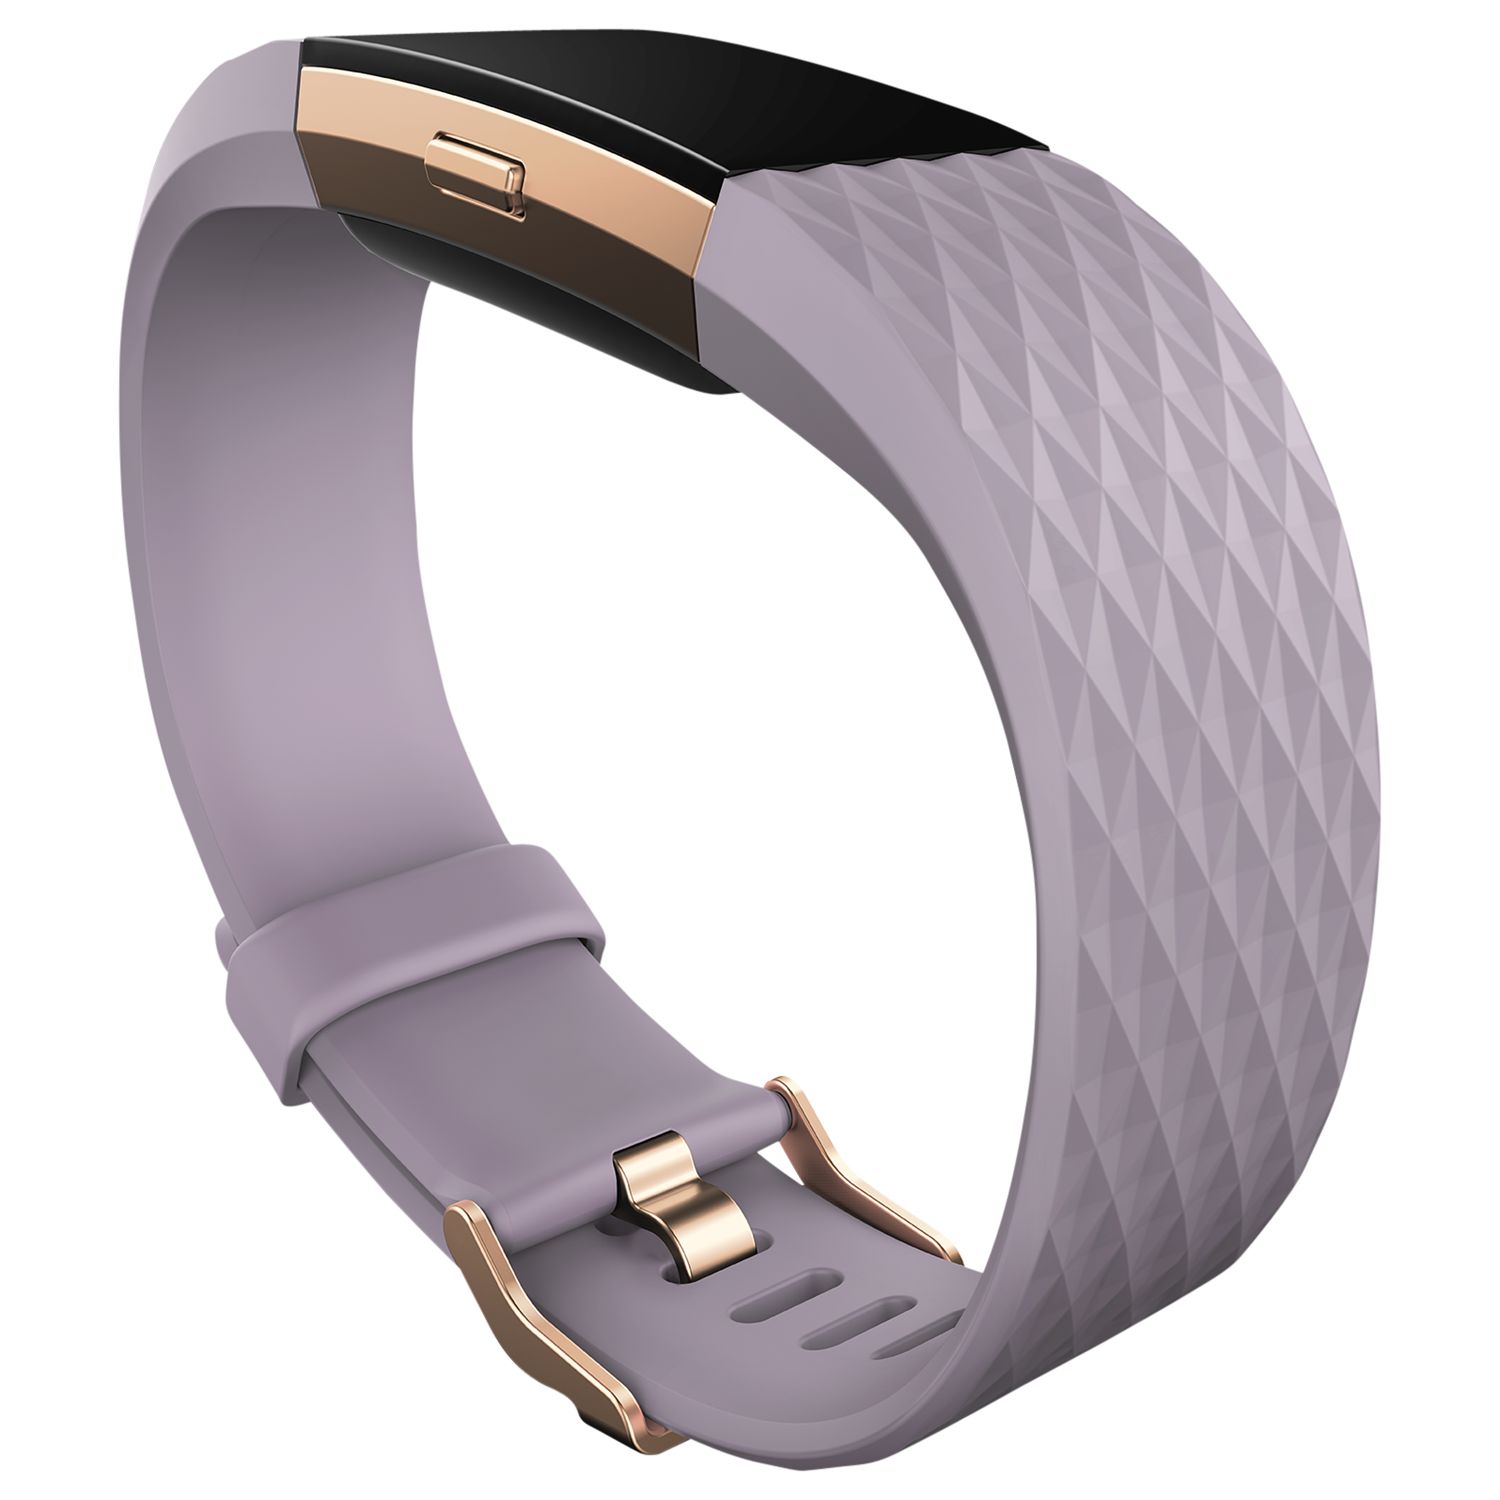 fitbit charge 2 special edition